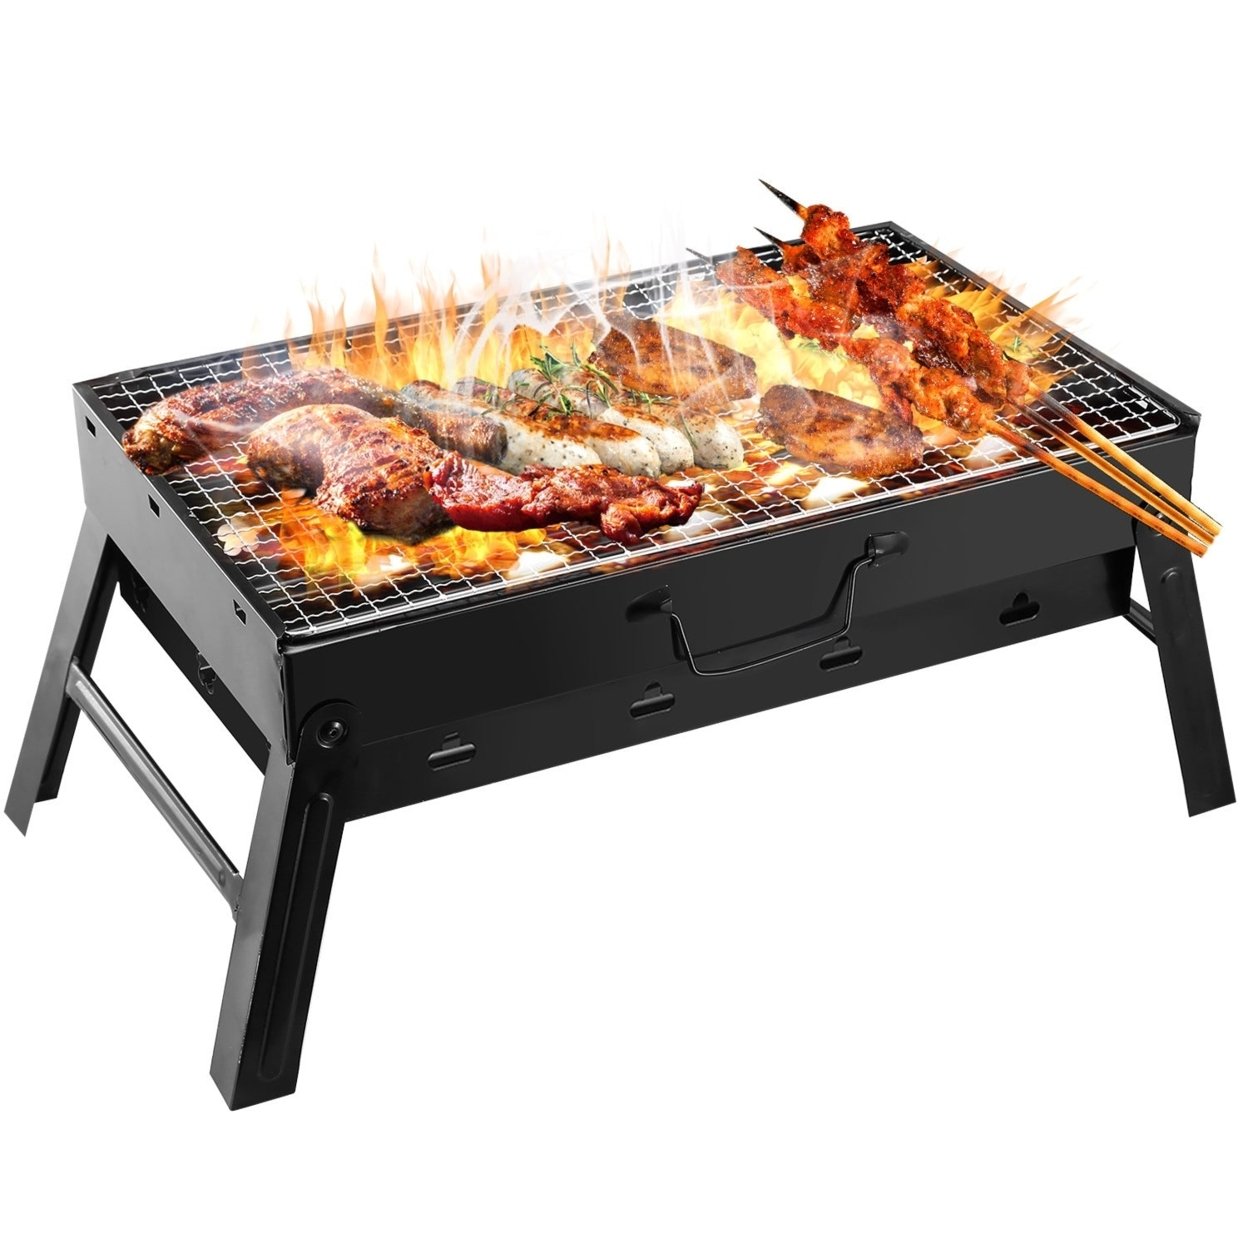 SKUSHOPS Foldable Portable BBQ Charcoal Grill Grill Lightweight Smoker Grill for Camping Picnics Garden Grilling